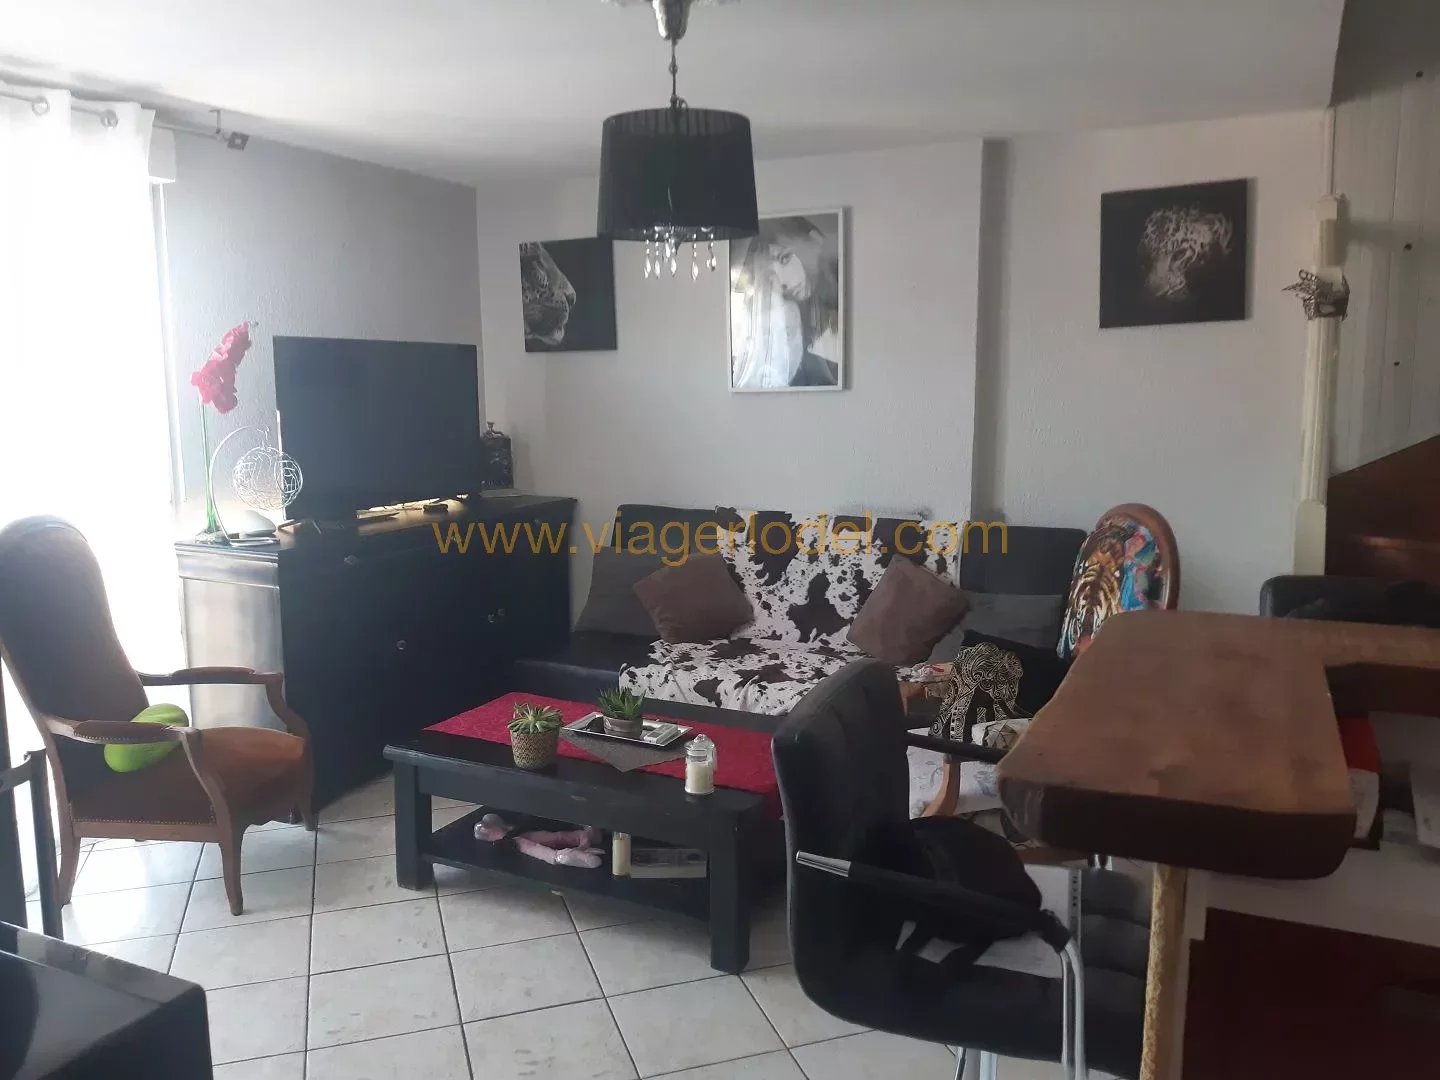 Ref.9325 - RENTED VIAGER : FREJUS between the Old Town and the beaches